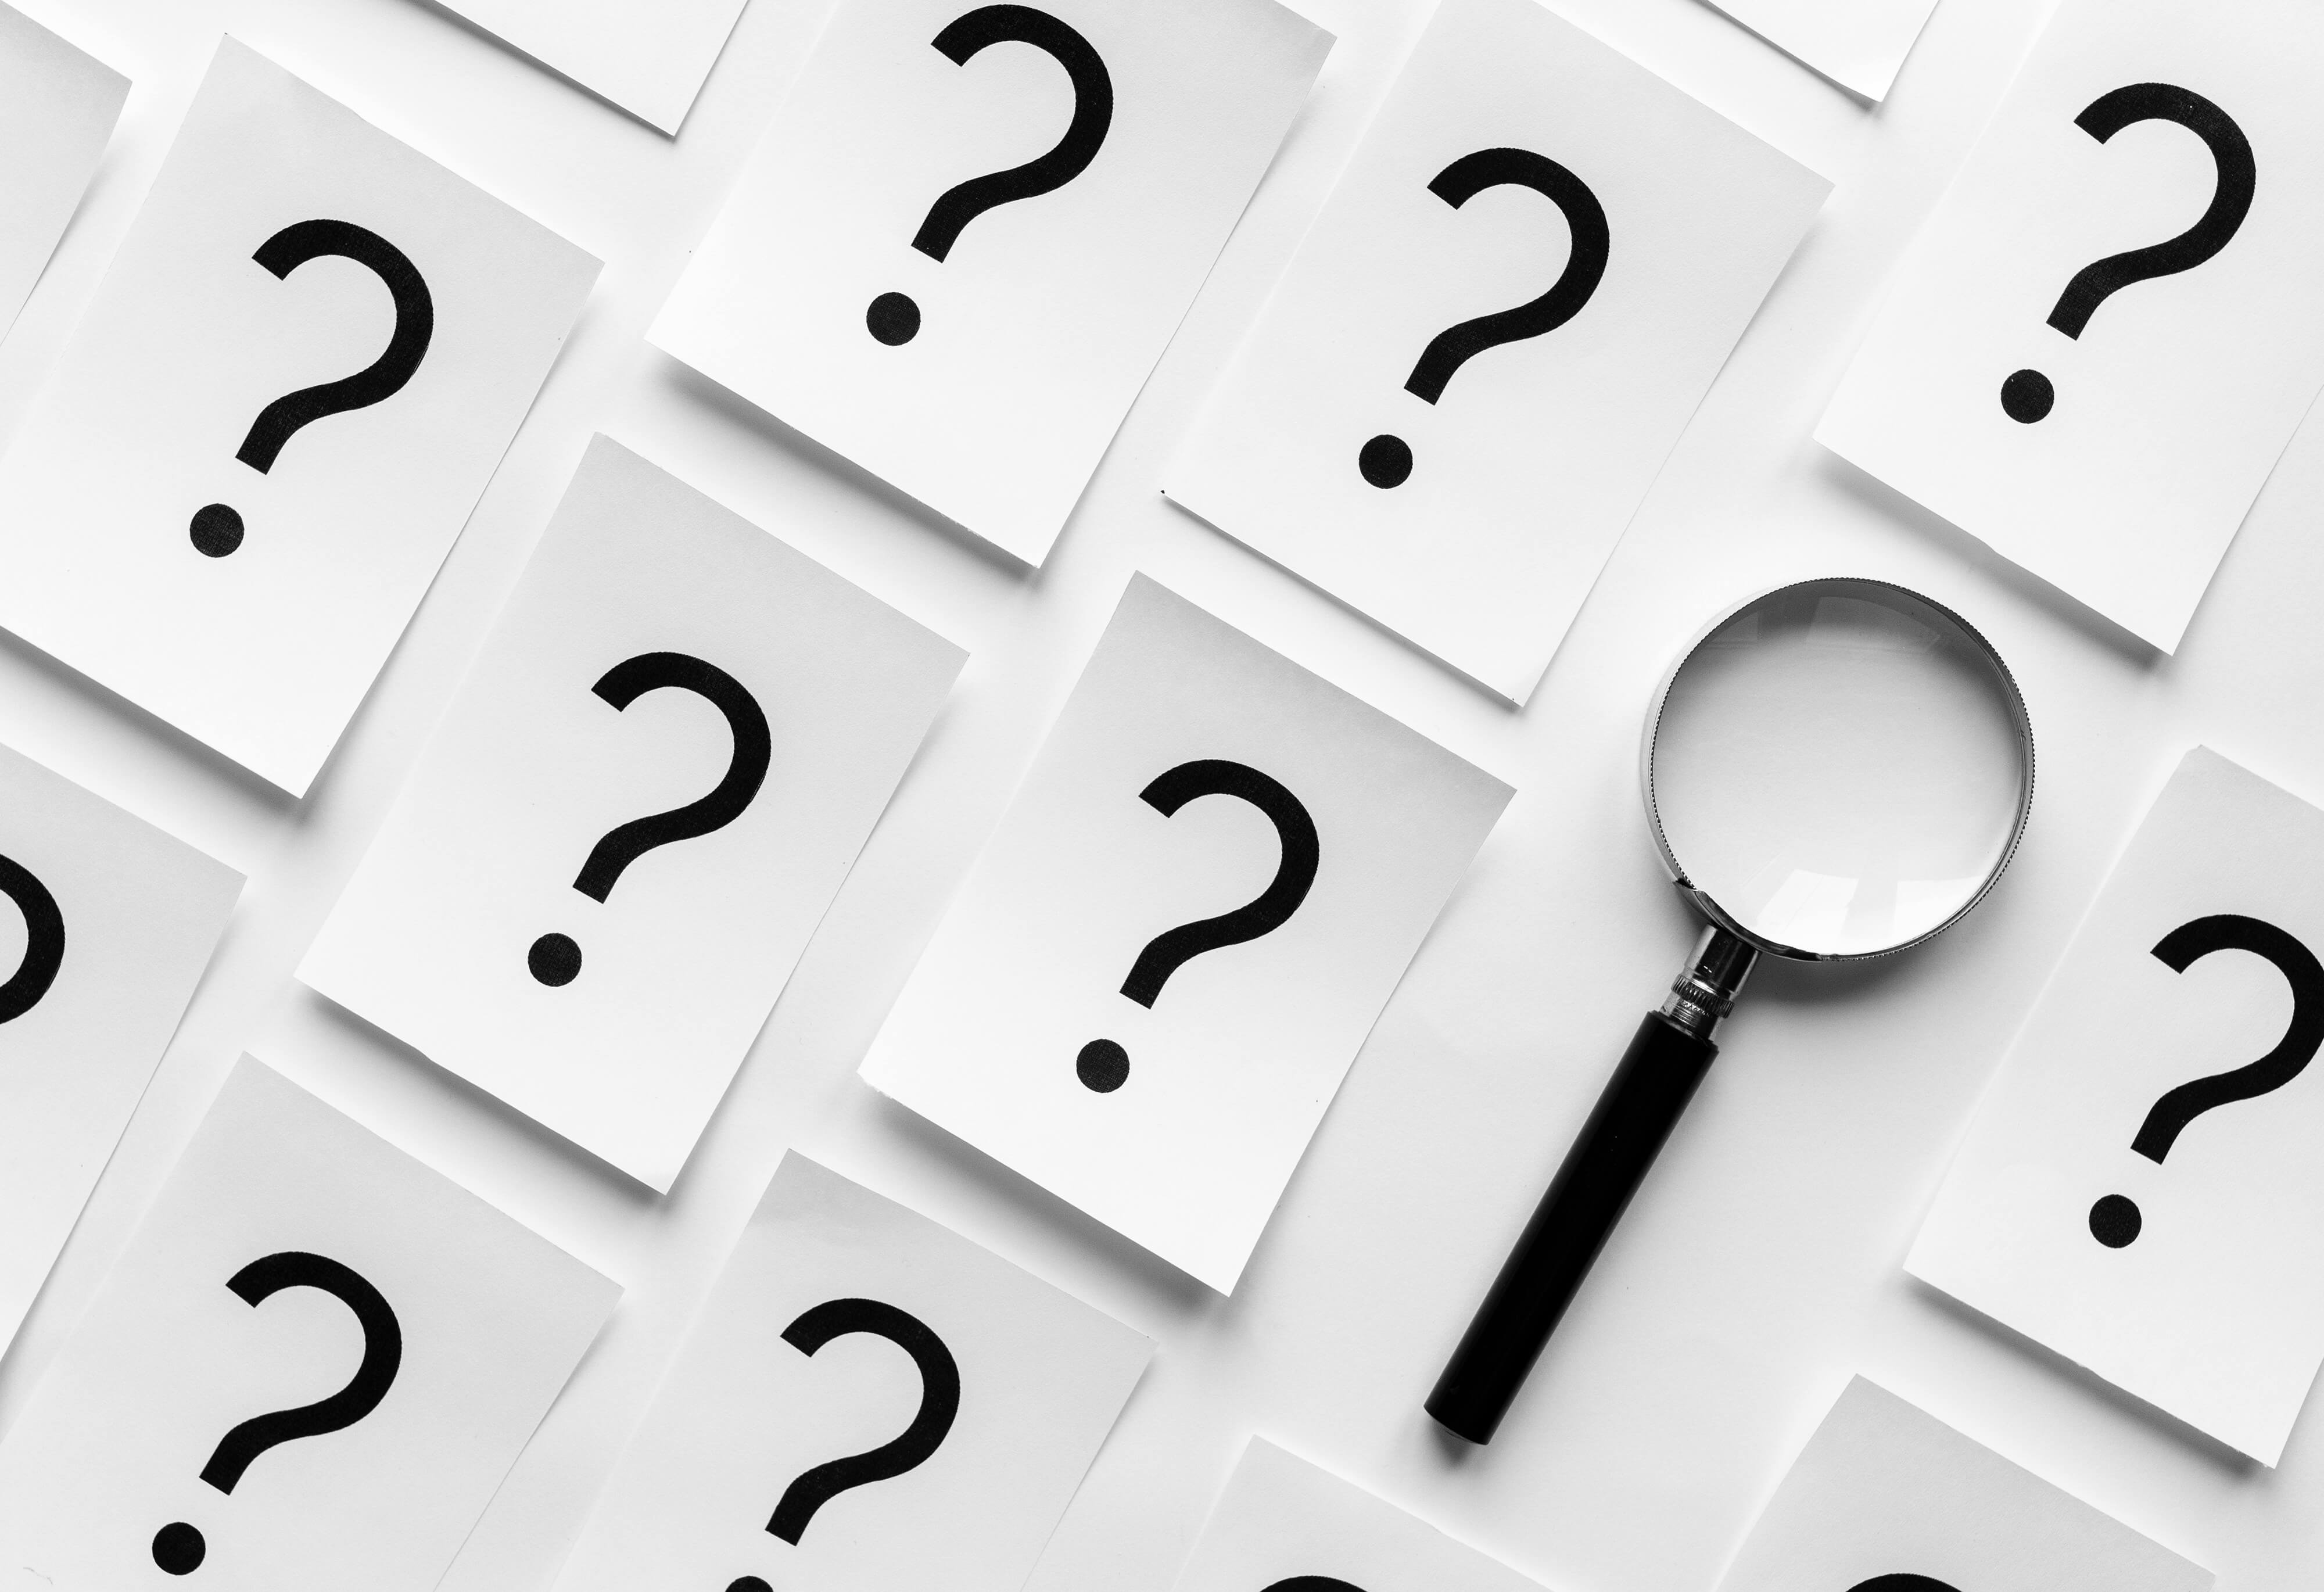 Cut Away Excessive Punctuation. Question marks on sheets of paper lay next to magnifying glass.